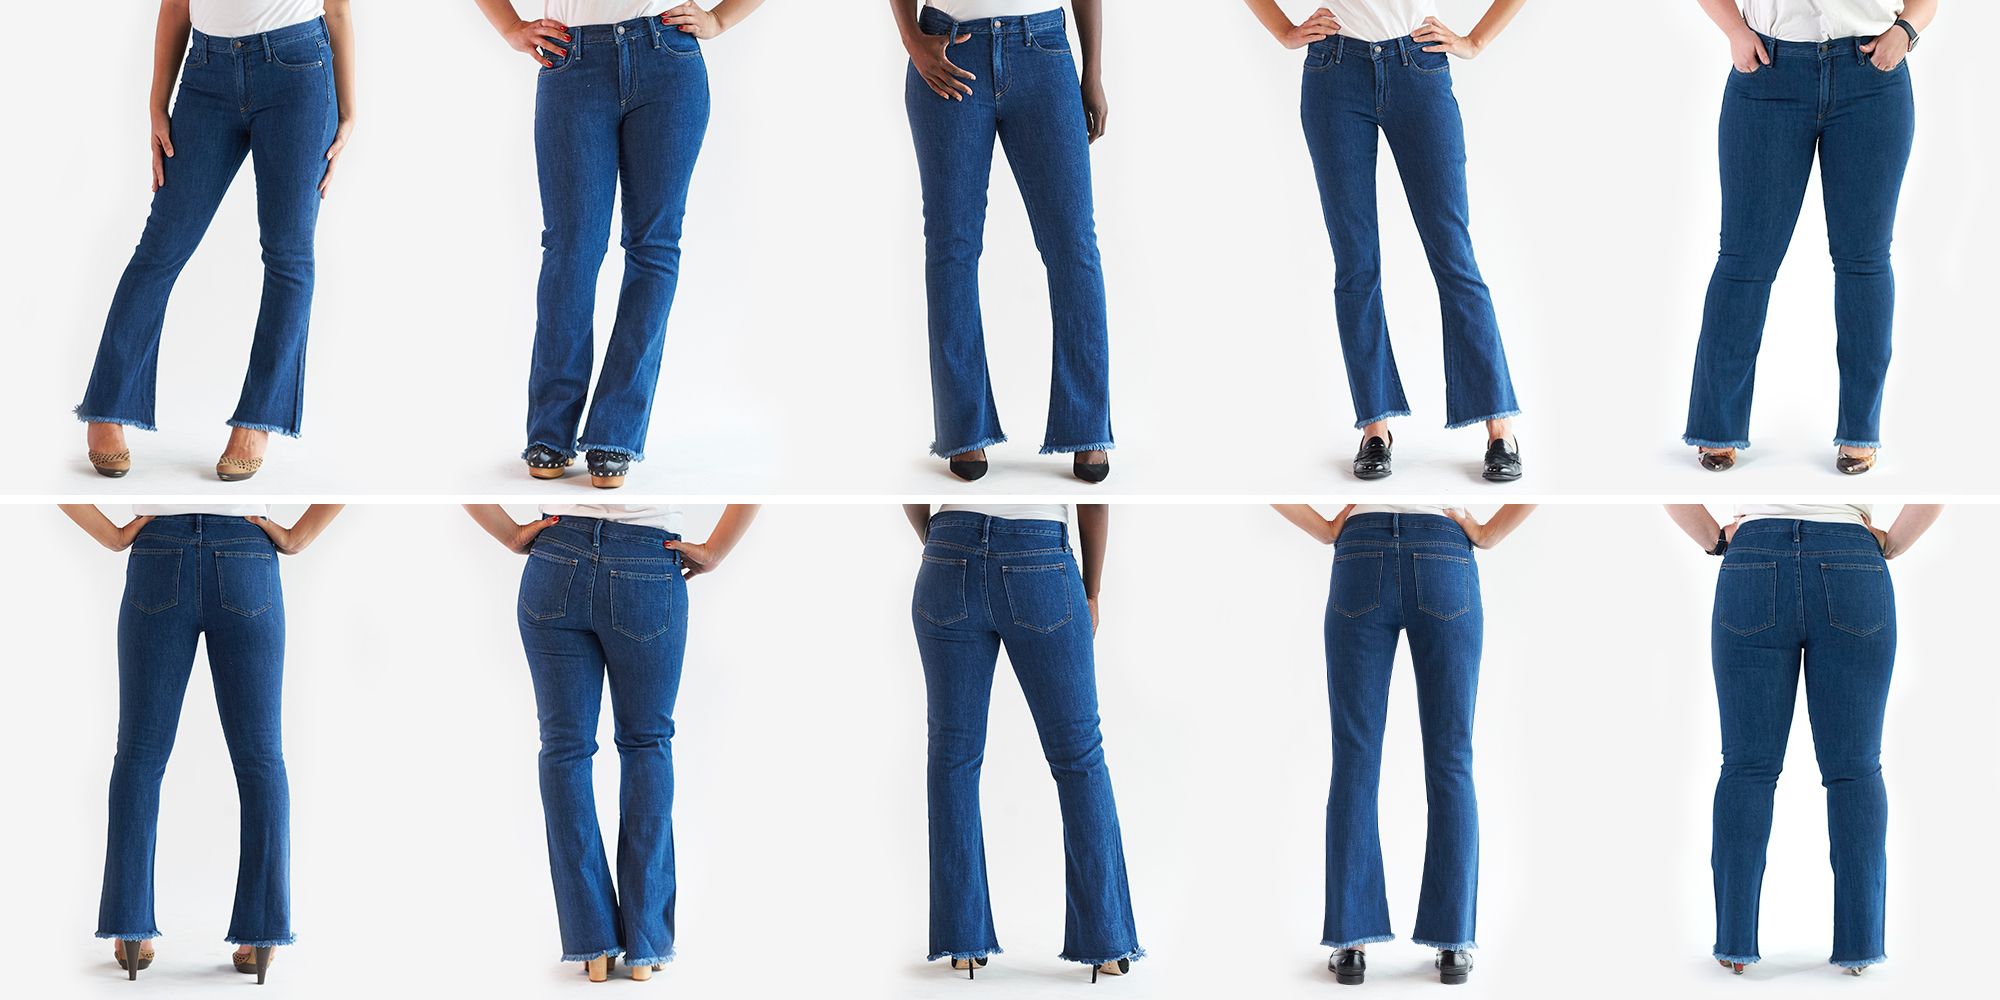 Fall 2022 Denim Jeans Guide: How to Style 6 Types of Denim